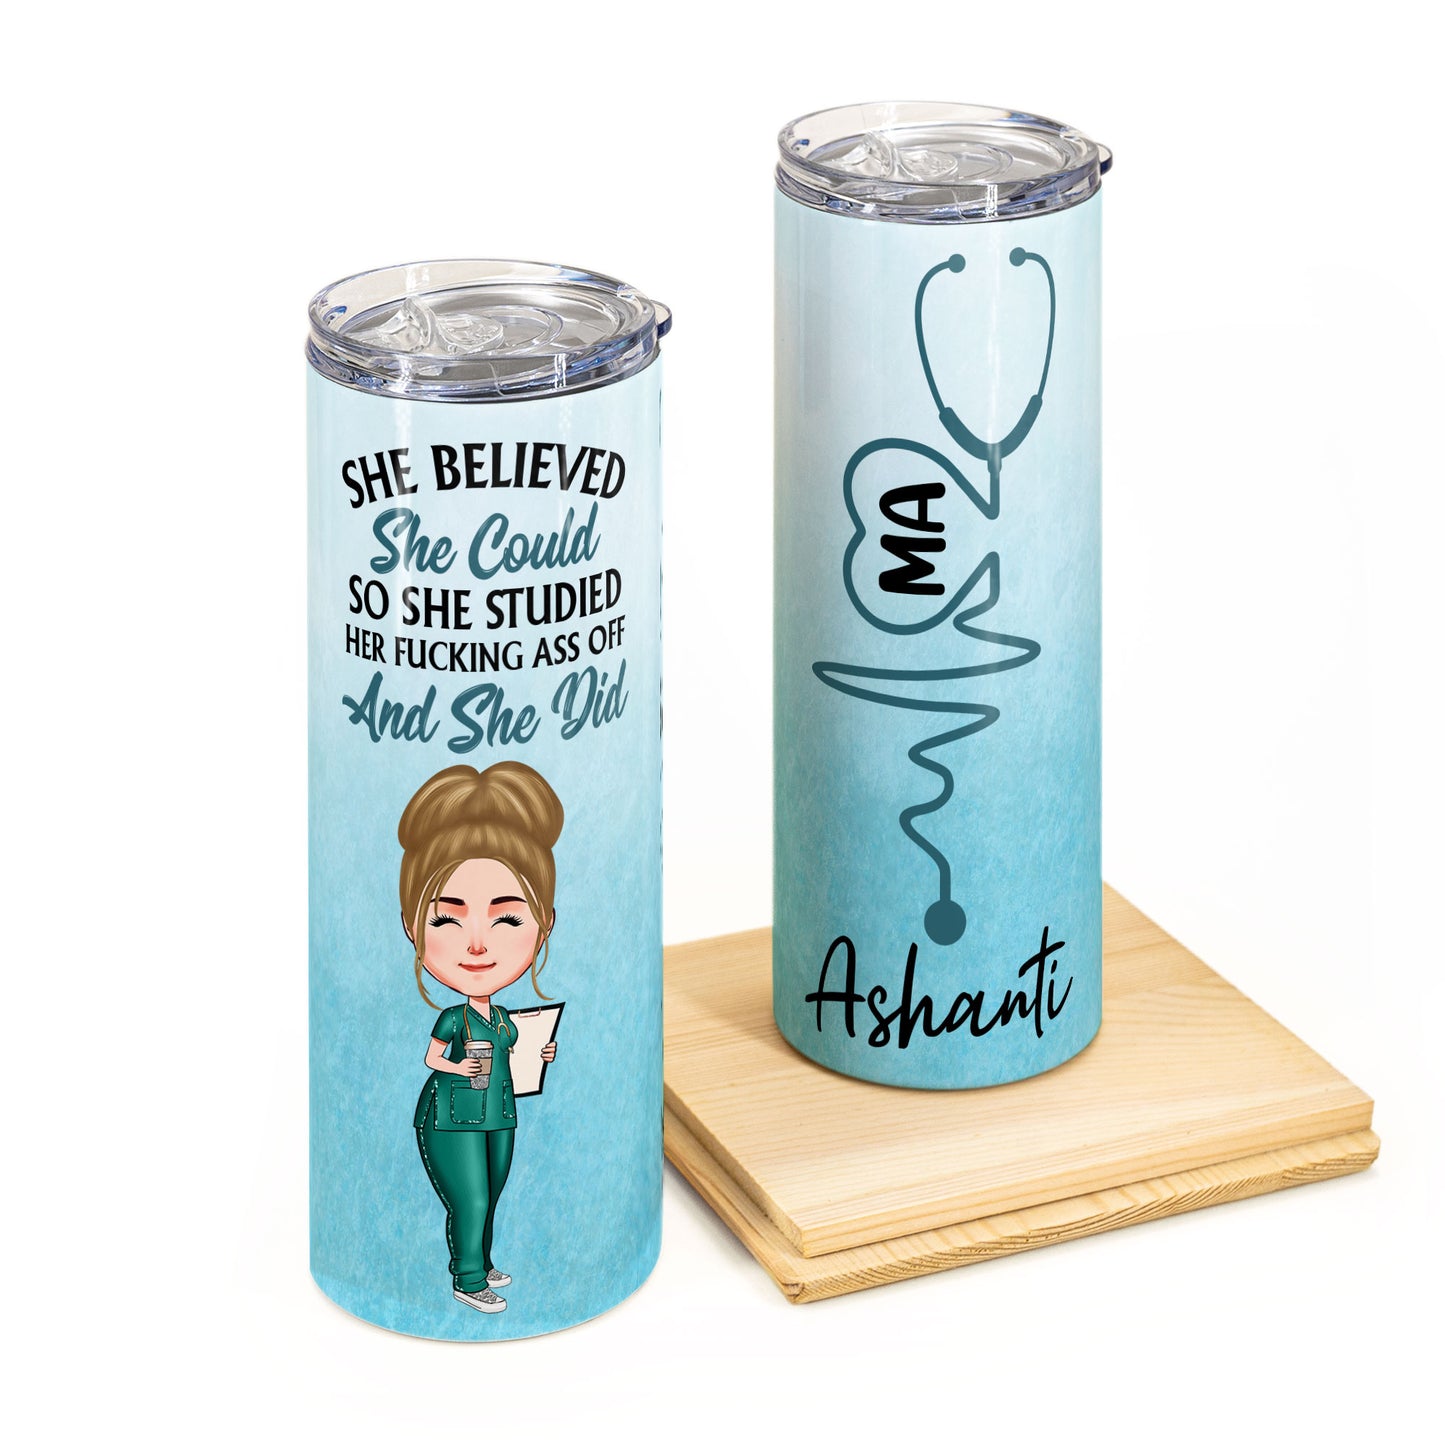 She Believed She Could So She Studied And She Did - Personalized Skinny Tumbler - Graduation, Birthday Gift For New Nurse